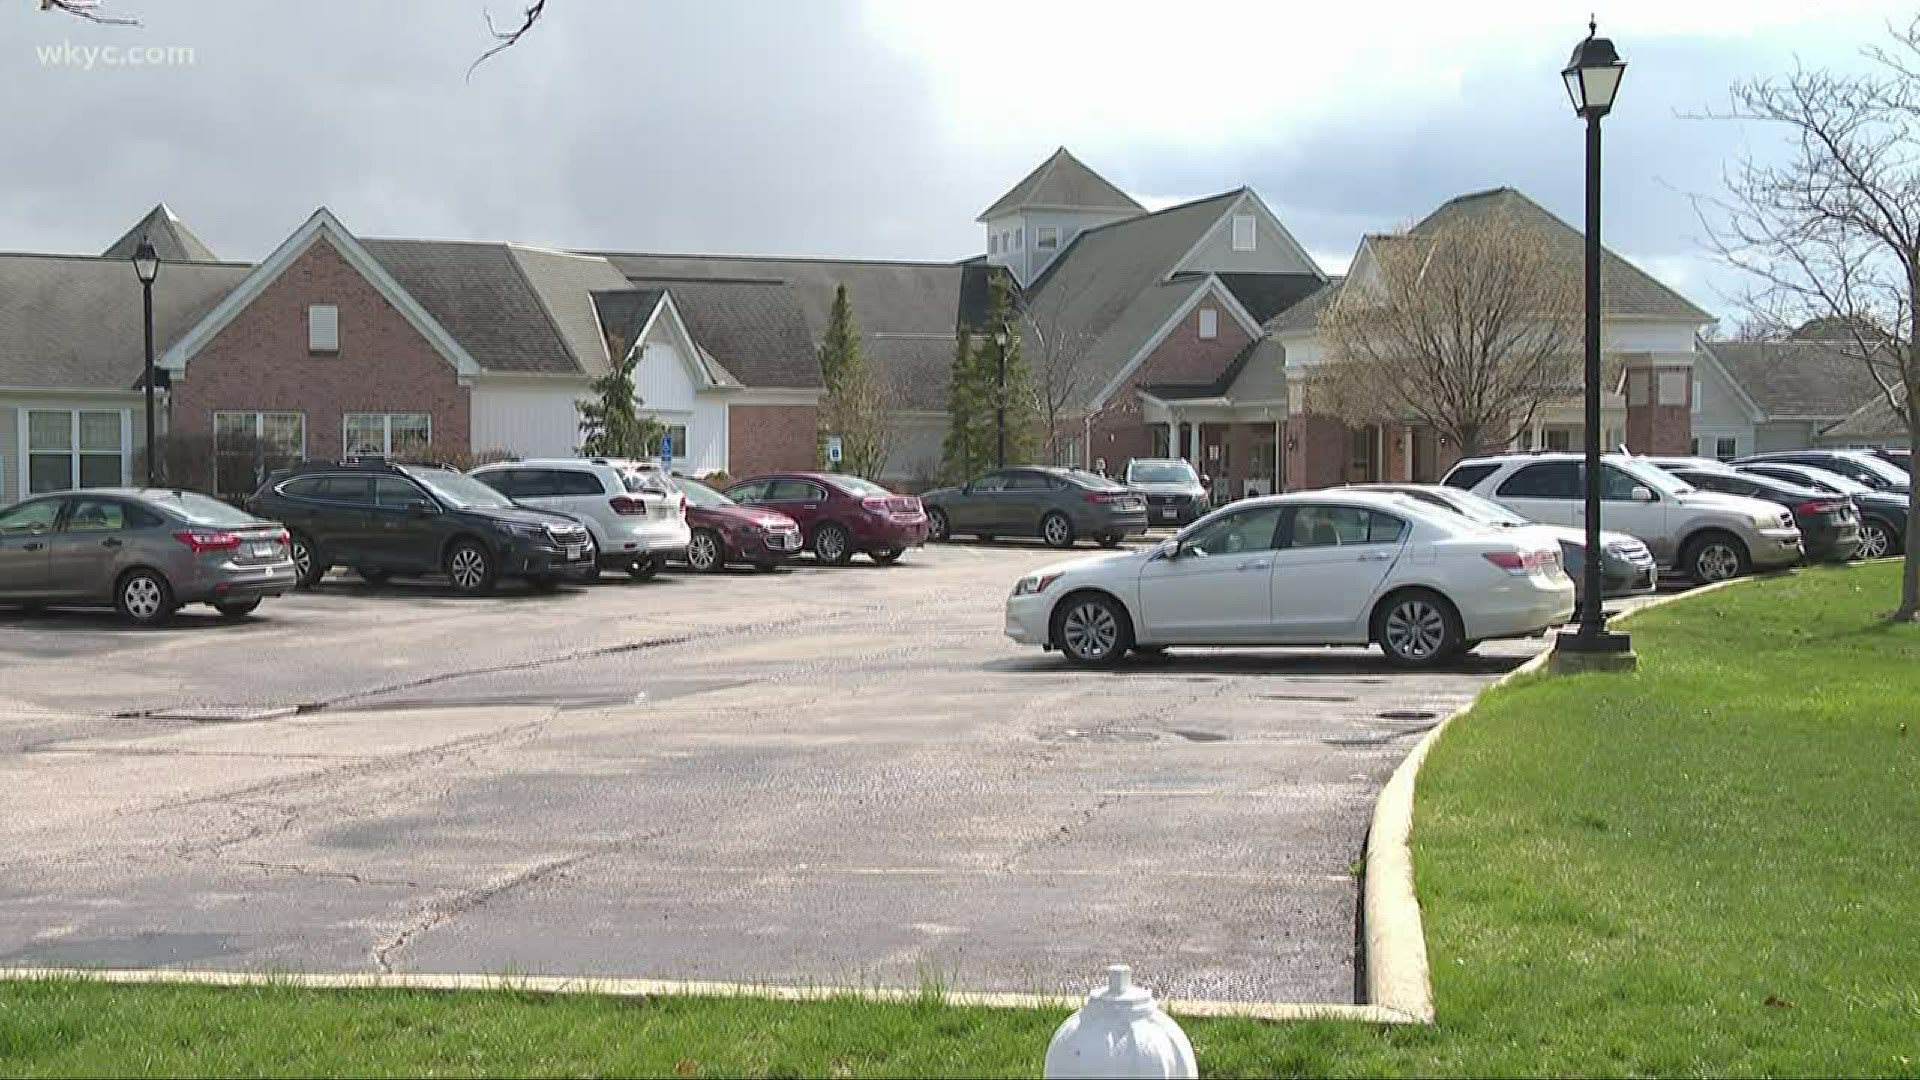 389 nursing home patients have COVID-19 but state officials won't tell you where these infections are popping up. Investigator Rachel Polansky searches for answers.